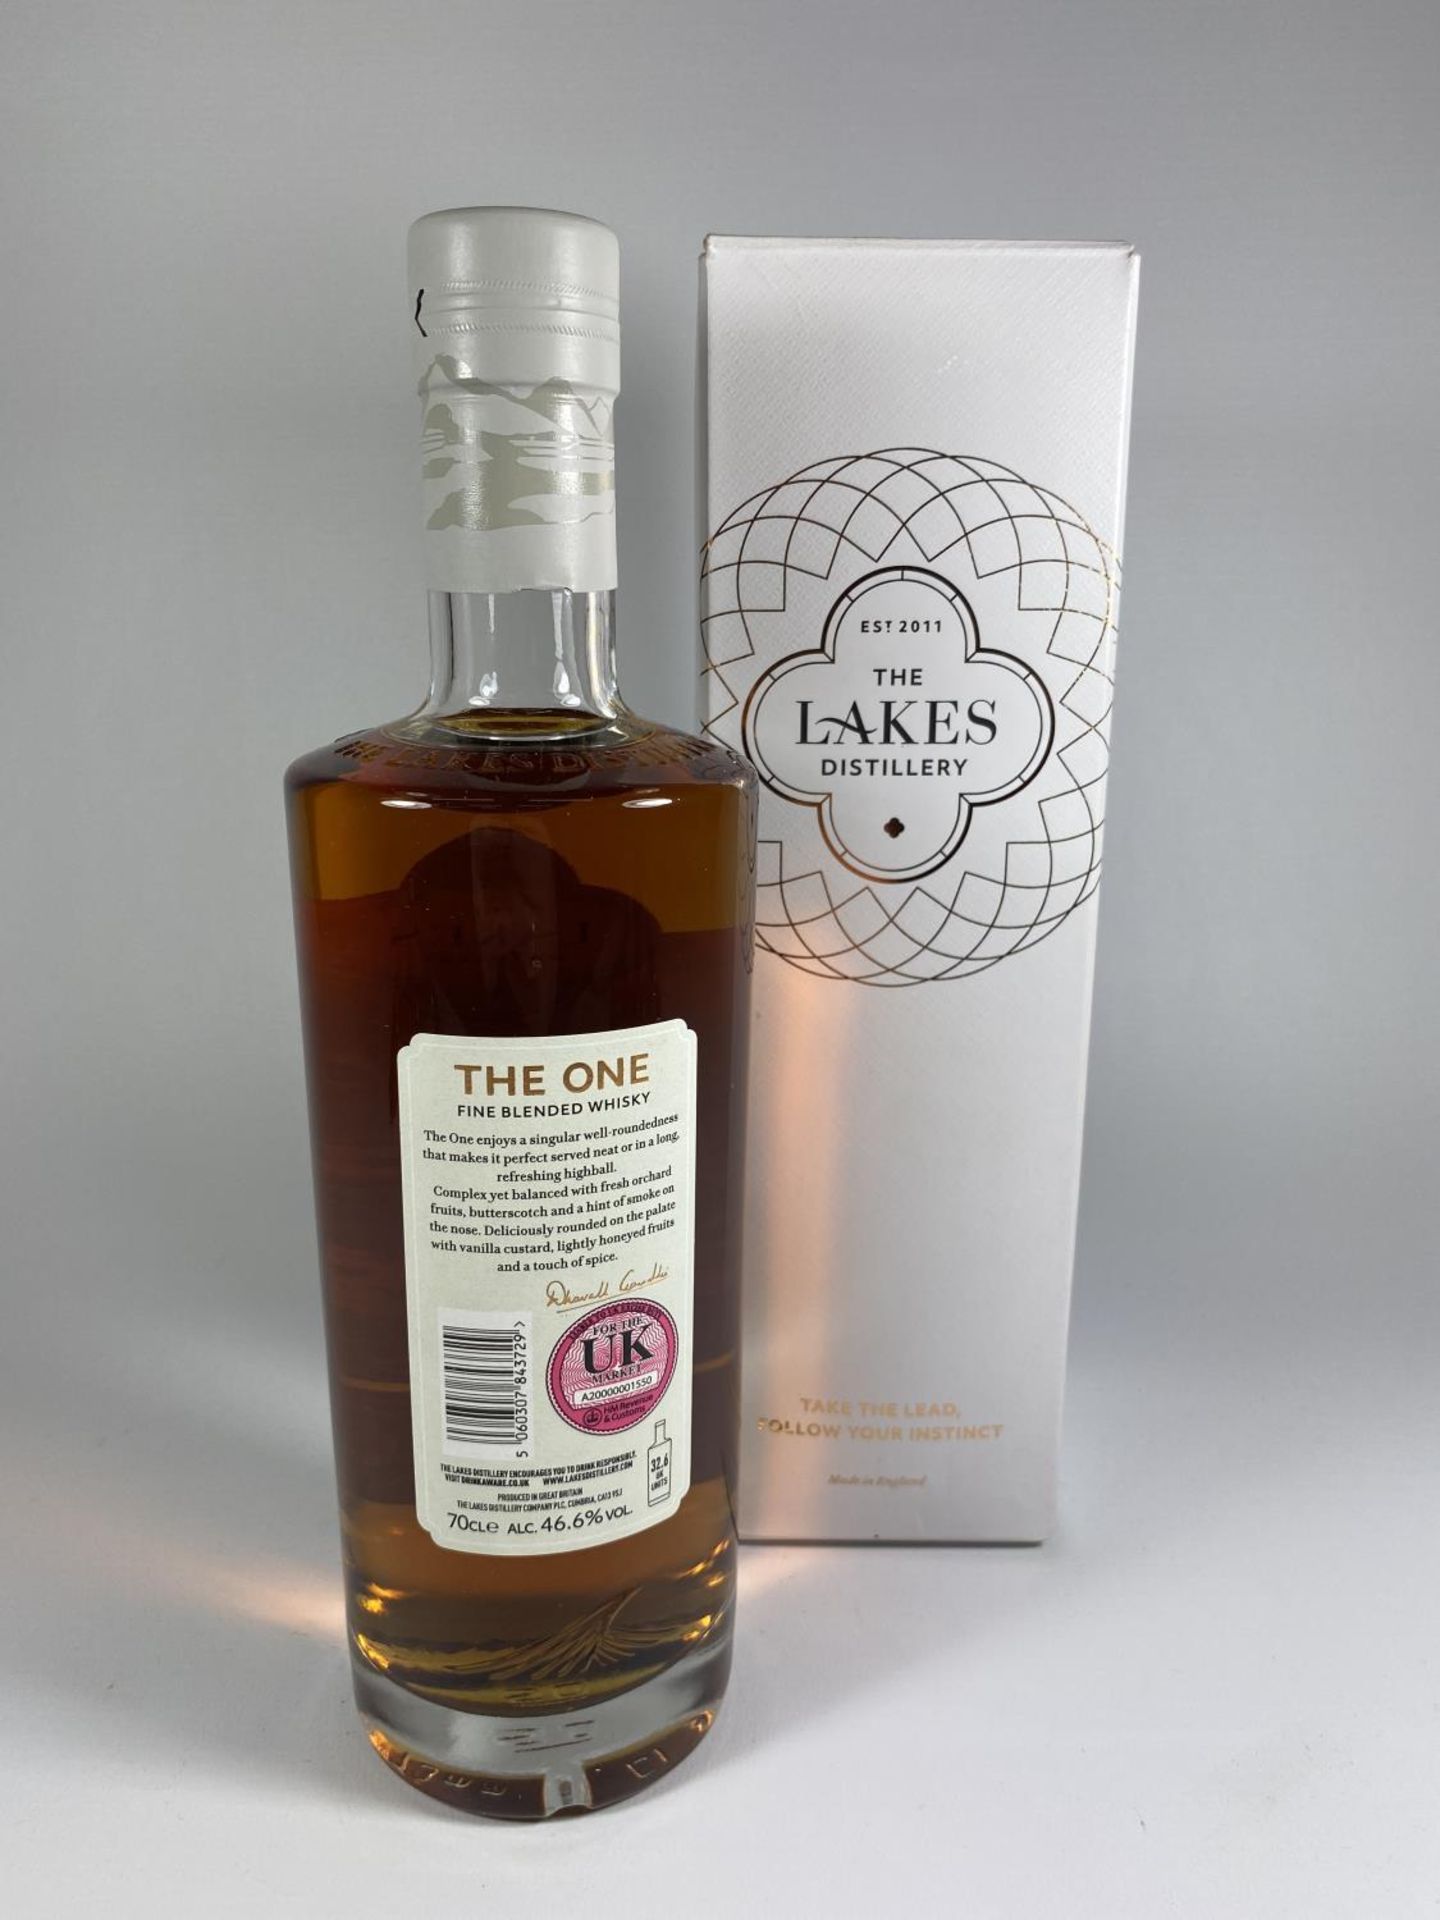 1 X 70CL BOXED BOTTLE - THE LAKES DISTILLERY 'THE ONE' FINE BLENDED WHISKY - Image 3 of 3